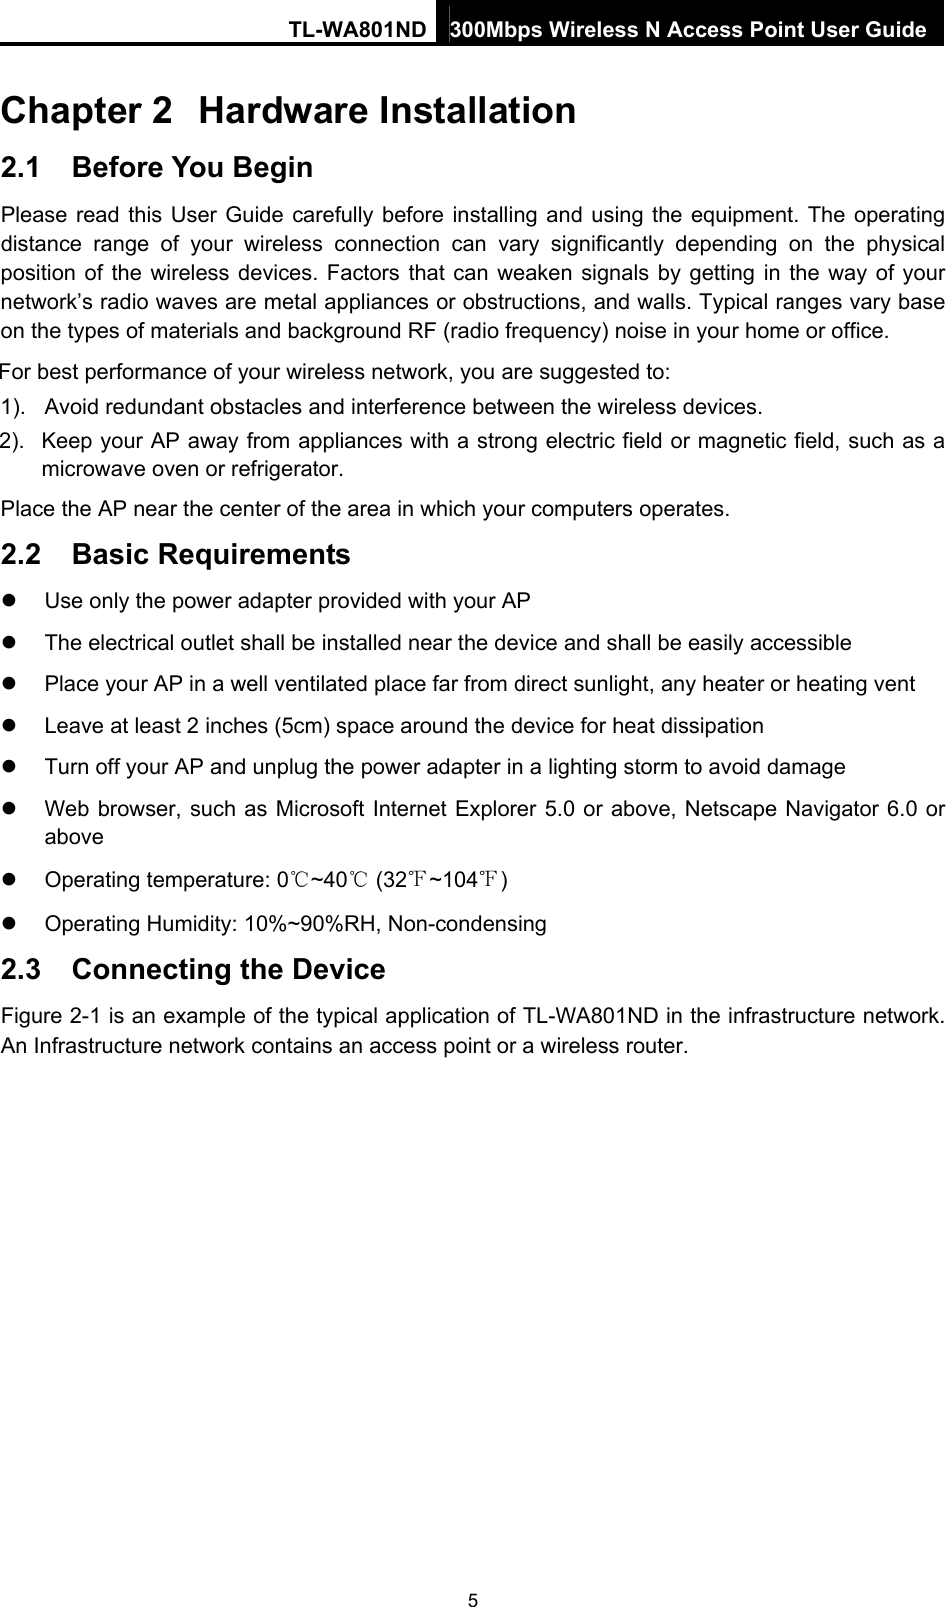 TL-WA801ND 300Mbps Wireless N Access Point User Guide Chapter 2  Hardware Installation 2.1  Before You Begin Please read this User Guide carefully before installing and using the equipment. The operating distance range of your wireless connection can vary significantly depending on the physical position of the wireless devices. Factors that can weaken signals by getting in the way of your network’s radio waves are metal appliances or obstructions, and walls. Typical ranges vary base on the types of materials and background RF (radio frequency) noise in your home or office. For best performance of your wireless network, you are suggested to: 1).  Avoid redundant obstacles and interference between the wireless devices.   2).  Keep your AP away from appliances with a strong electric field or magnetic field, such as a microwave oven or refrigerator. Place the AP near the center of the area in which your computers operates. 2.2  Basic Requirements   Use only the power adapter provided with your AP     The electrical outlet shall be installed near the device and shall be easily accessible   Place your AP in a well ventilated place far from direct sunlight, any heater or heating vent   Leave at least 2 inches (5cm) space around the device for heat dissipation   Turn off your AP and unplug the power adapter in a lighting storm to avoid damage   Web browser, such as Microsoft Internet Explorer 5.0 or above, Netscape Navigator 6.0 or above   Operating temperature: 0℃~40℃ (32℉~104℉)   Operating Humidity: 10%~90%RH, Non-condensing 2.3  Connecting the Device Figure 2-1 is an example of the typical application of TL-WA801ND in the infrastructure network. An Infrastructure network contains an access point or a wireless router. 5 